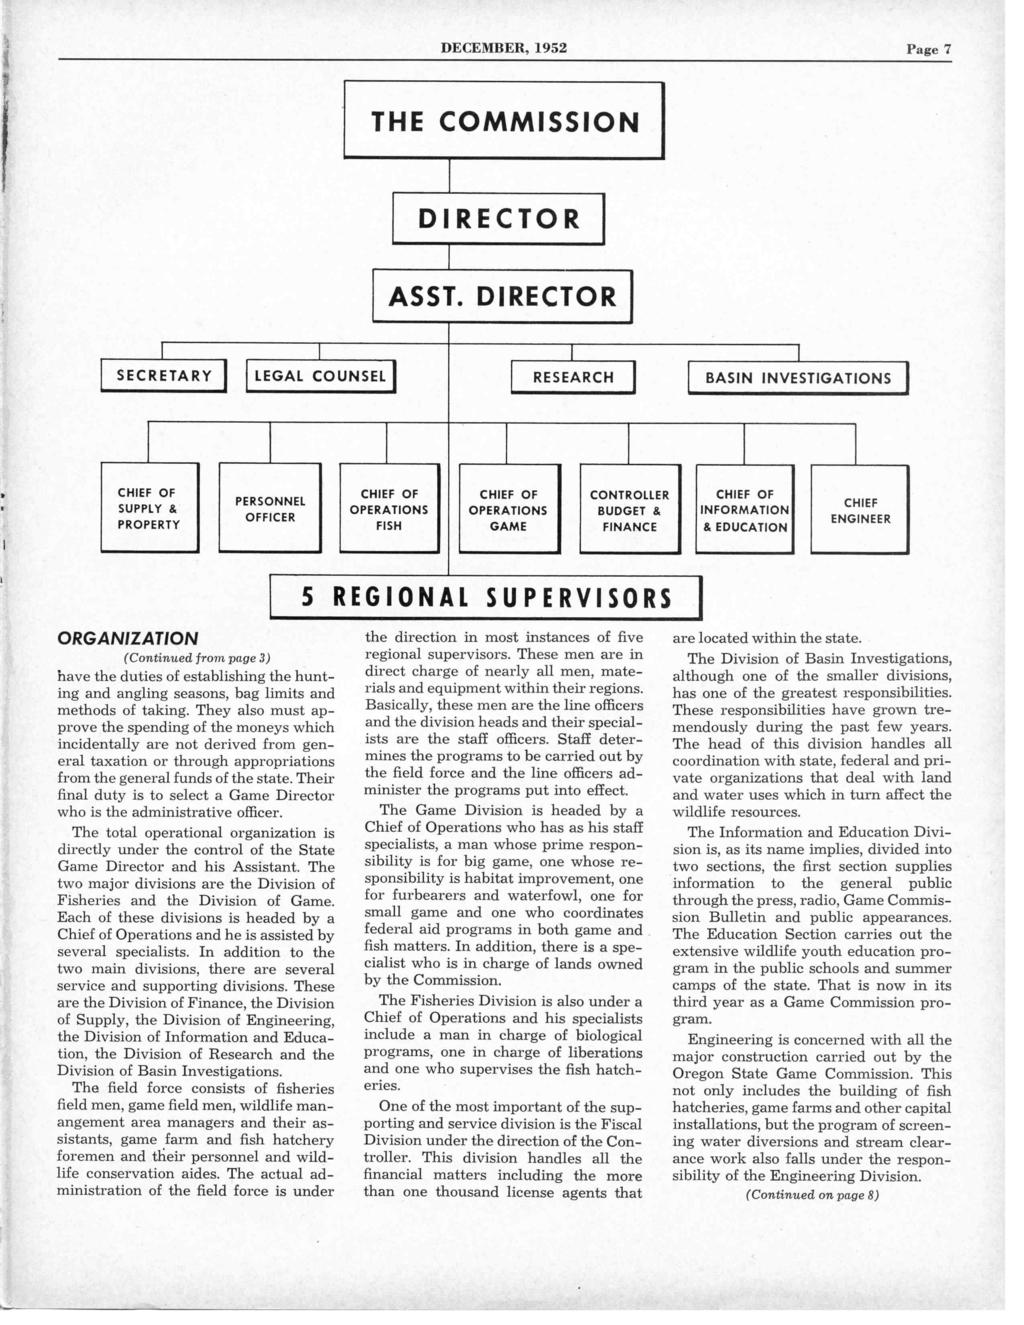 DECEMBER, 1952 Page 7 THE COMMISSION DIRECTOR ASST.